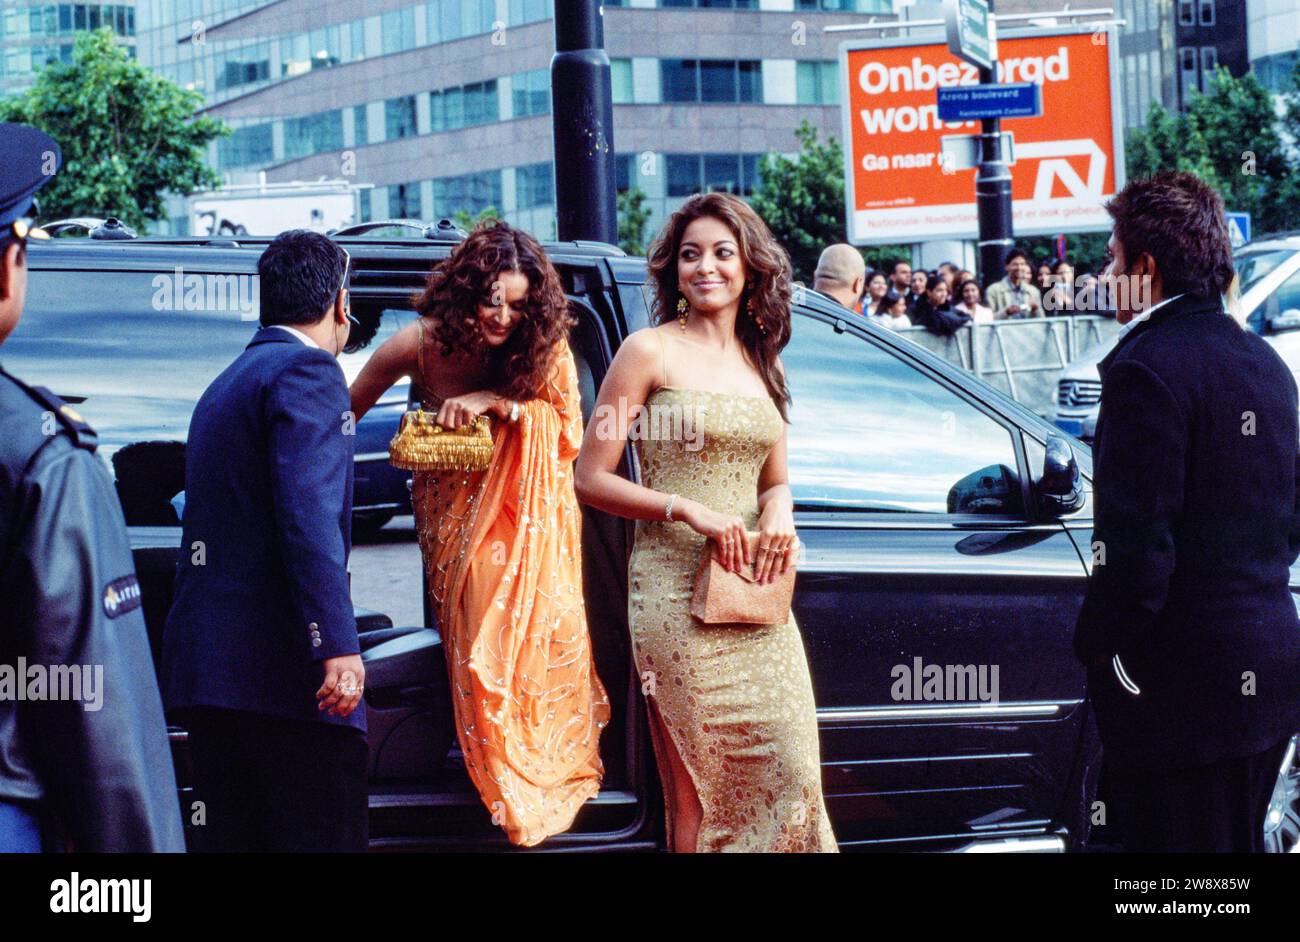 Archival Image. Entertainment - Amsterdam The Netherlands 11th June 2005. The creme de la creme of Indian cinema descend on Amsterdam for the IIFA Awards weekend. At the Amsterdam Arena VIPs arrive on the red carpet for the awards ceremony. Actress Tanushree Dutta Bollywood, celebrity, celebrities, actor, actors, actress, International Indian Film Awards, stars, bekende nederlanders, nederland, cinema, film, star, stars, rode loper, cameras, Stock Photo